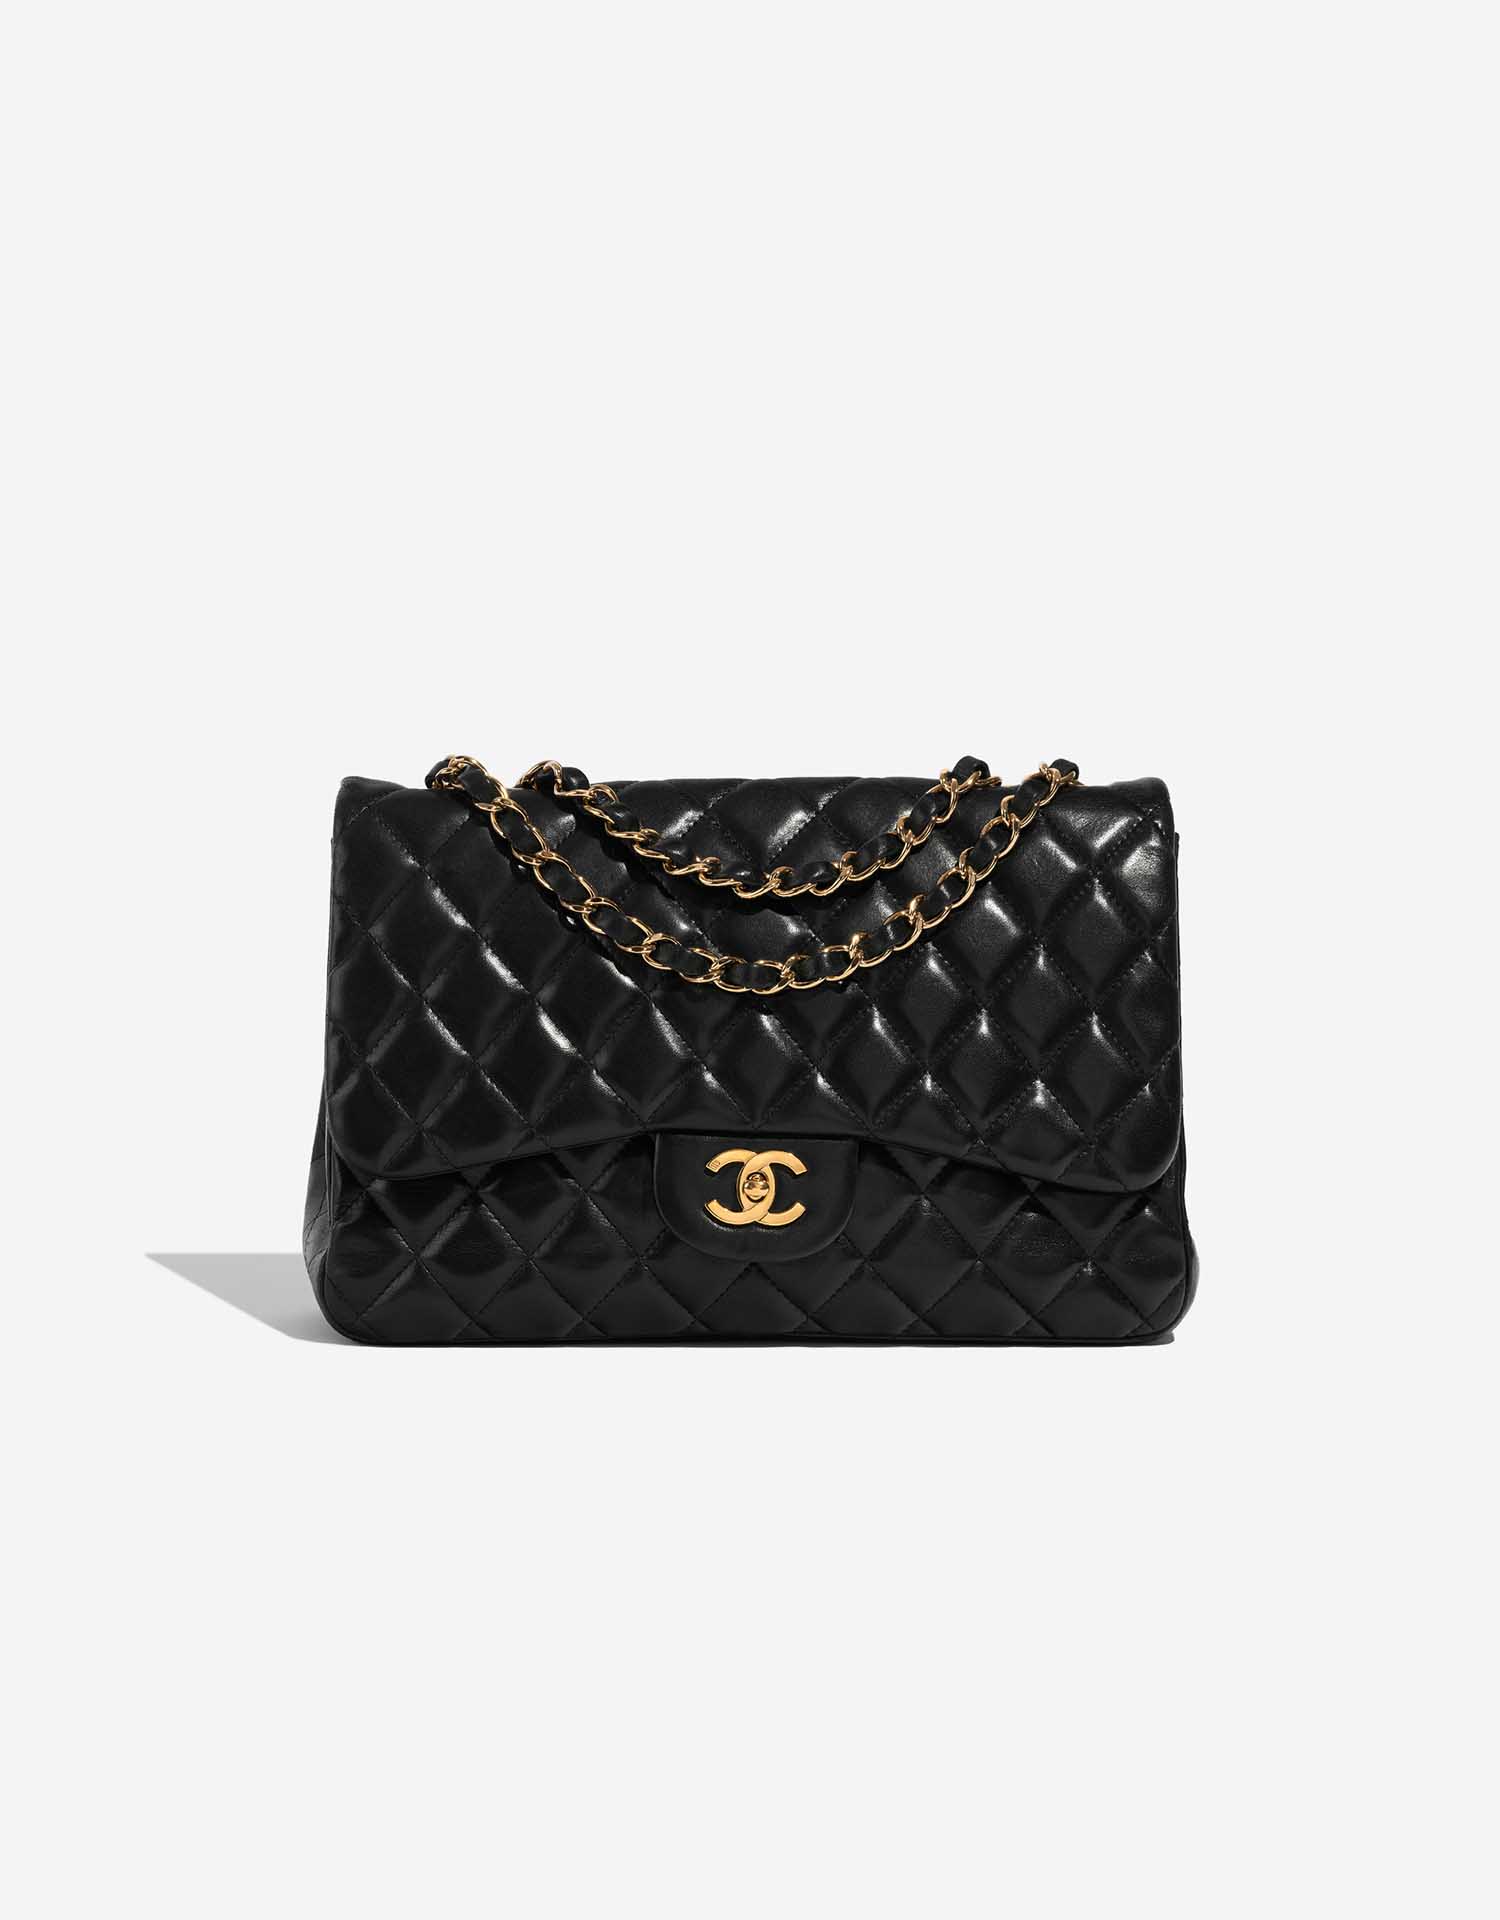 pink chanel pouch black